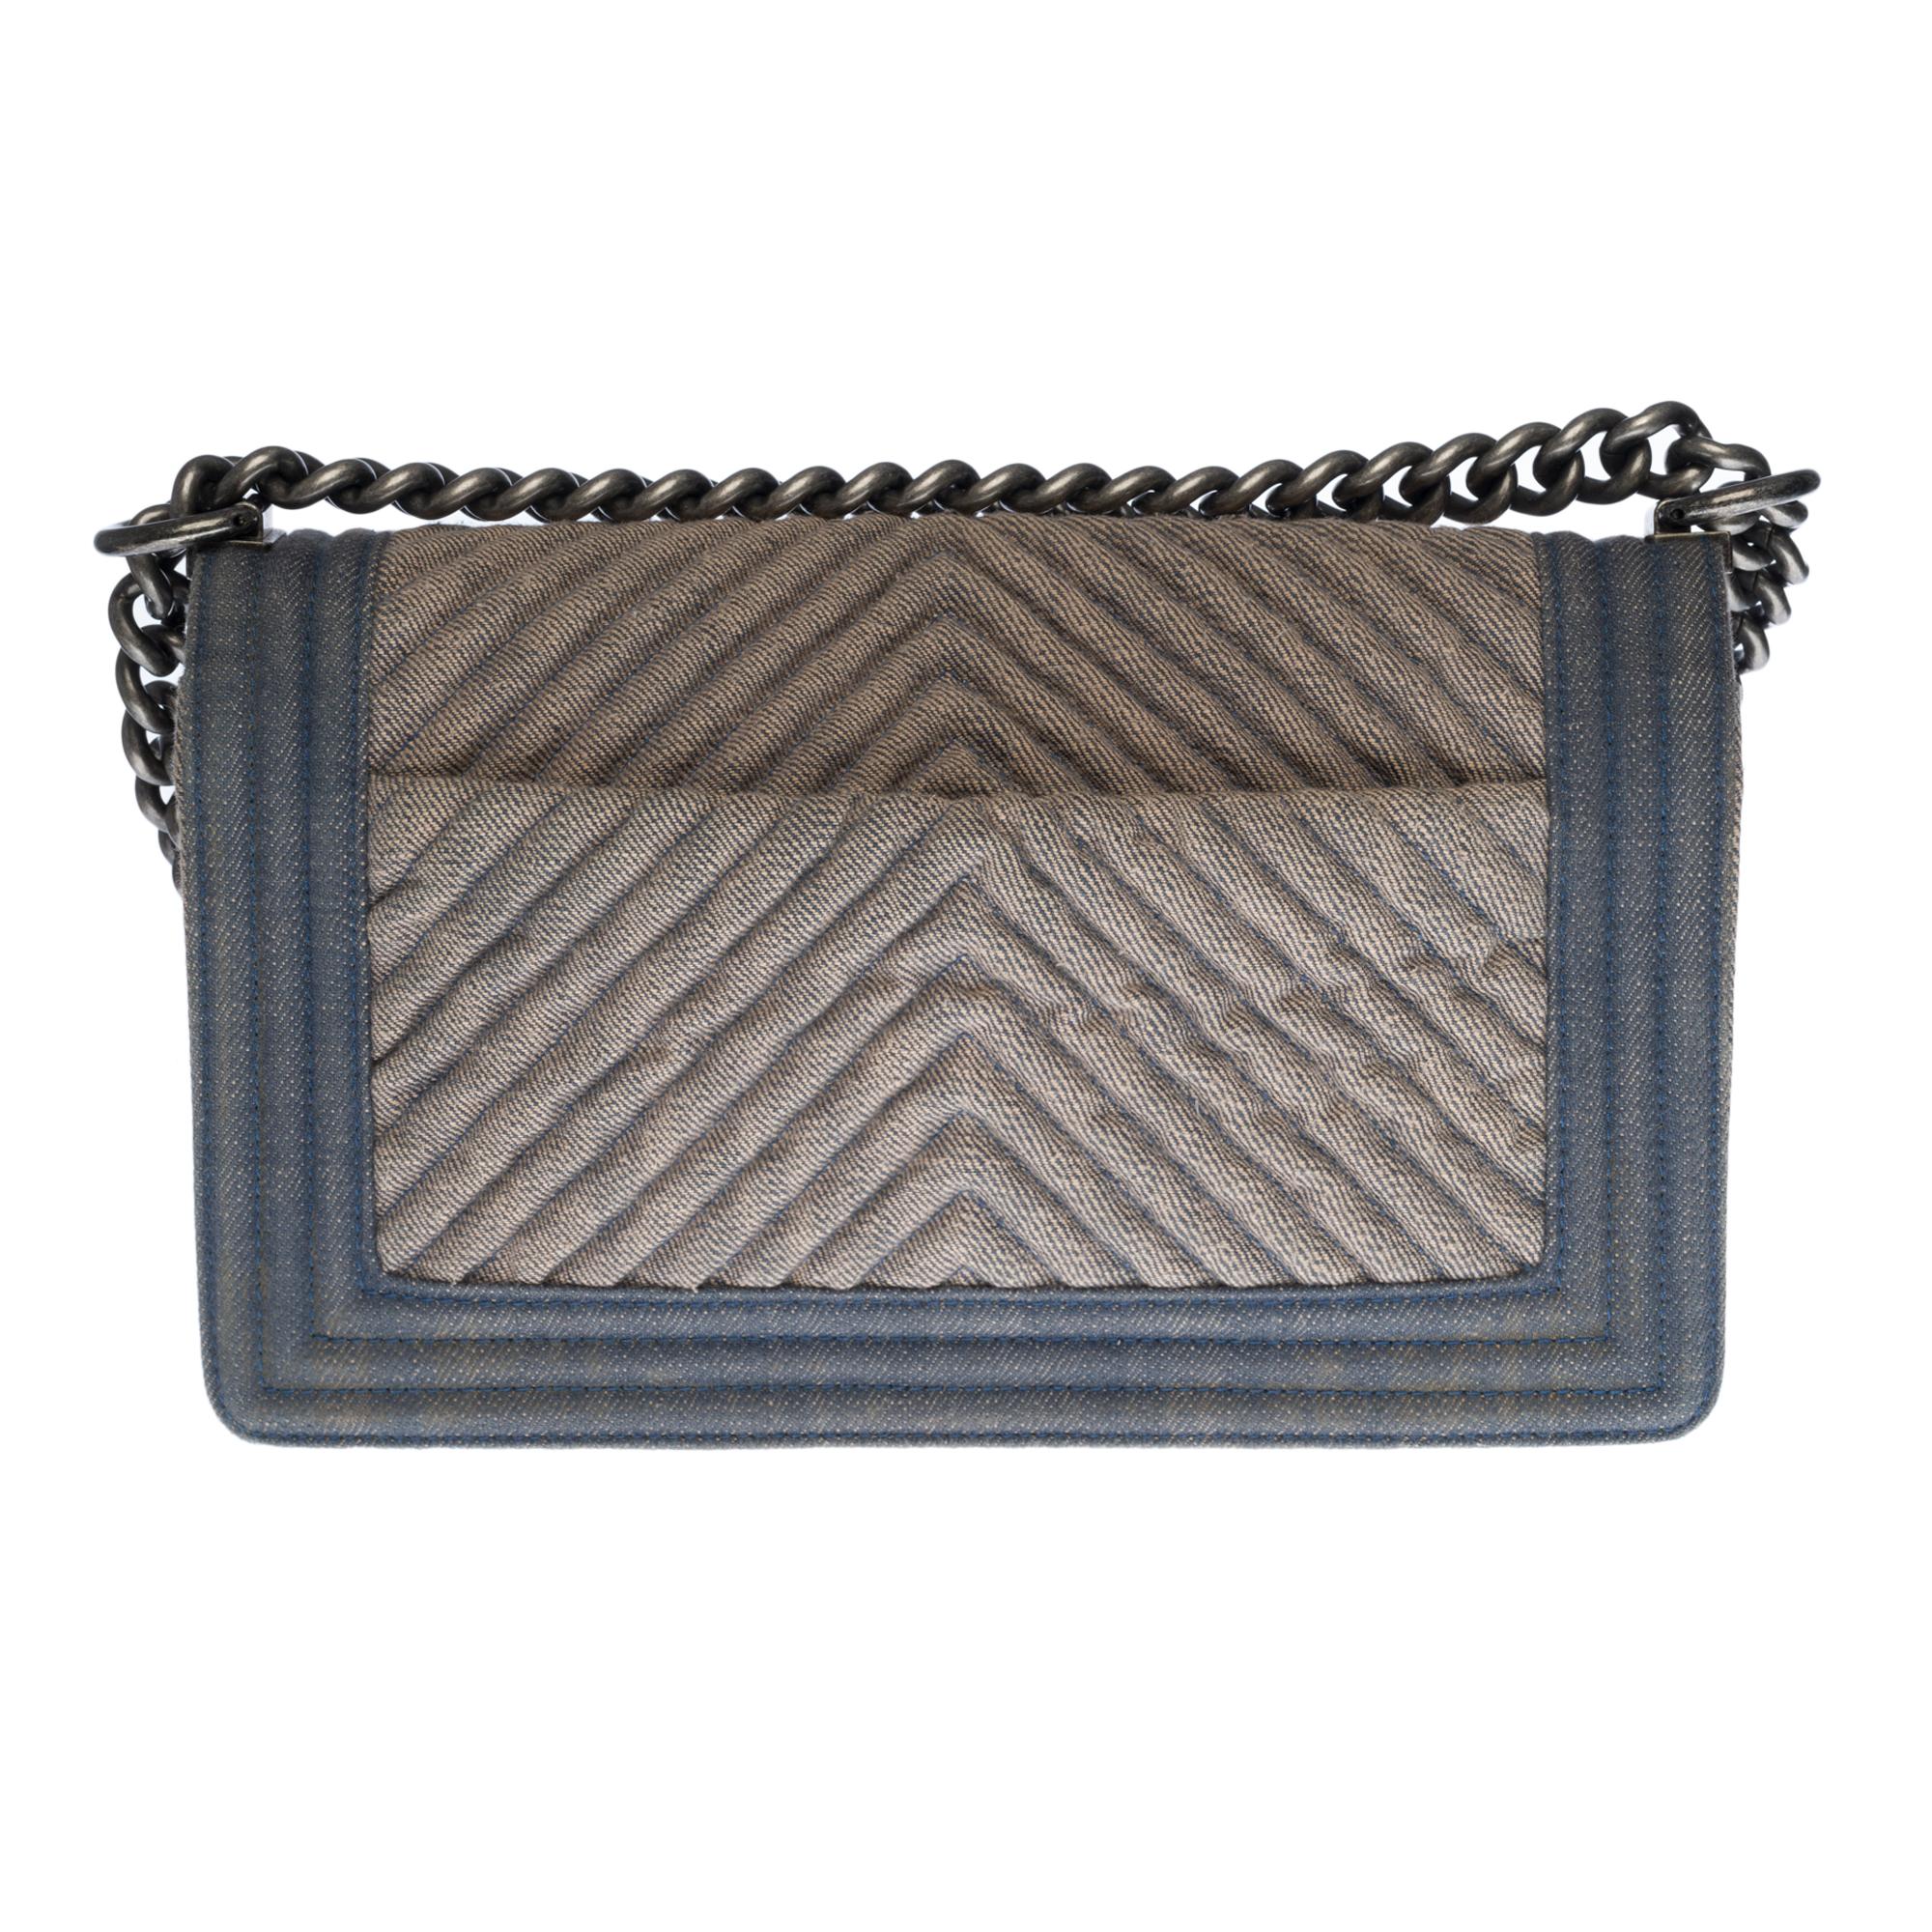 Gorgeous​ ​Chanel​ ​Boy​ ​old​ ​medium​ ​shoulder​ ​bag​ ​in​ ​blue​ ​denim,​ ​ruthenium​ ​metal​ ​hardware,​ ​an​ ​adjustable​ ​chain​ ​handle​ ​in​ ​ruthenium​ ​metal​ ​and​ ​leather​ ​that​ ​allows​ ​a​ ​shoulder​ ​or​ ​crossbody​ ​carry

Clasp​